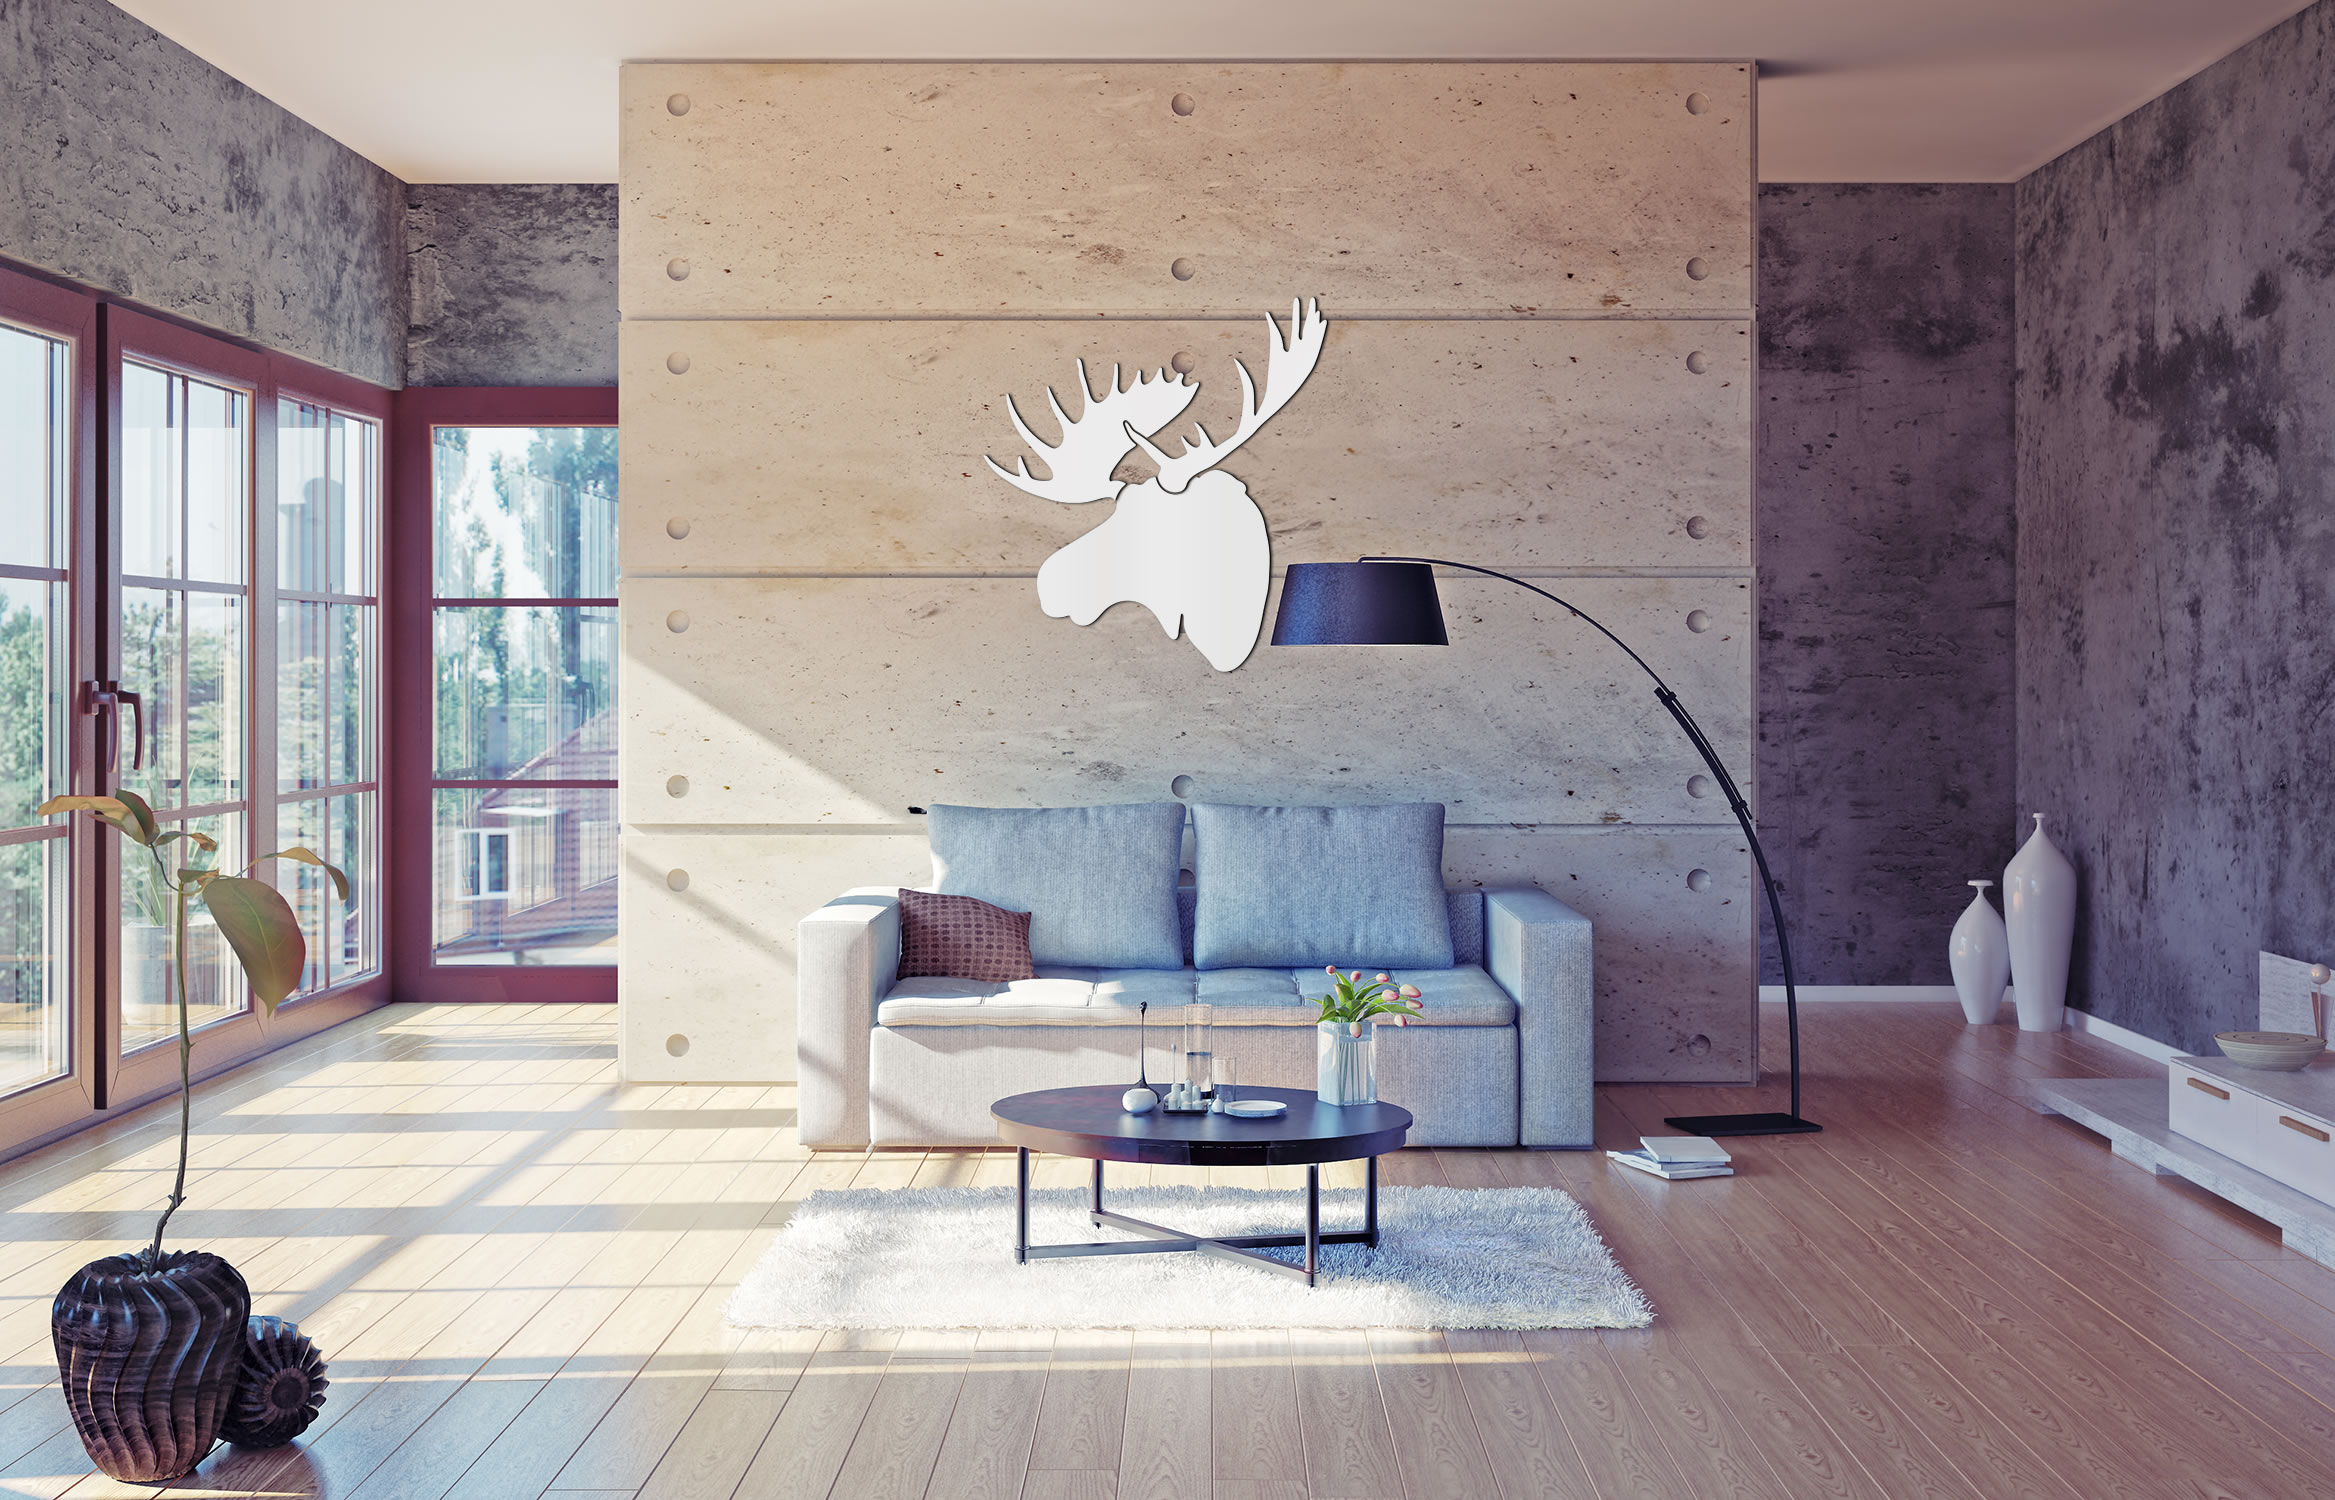 SNOW MOOSE - 36x36 in. Pure White D?cor - Lifestyle Image